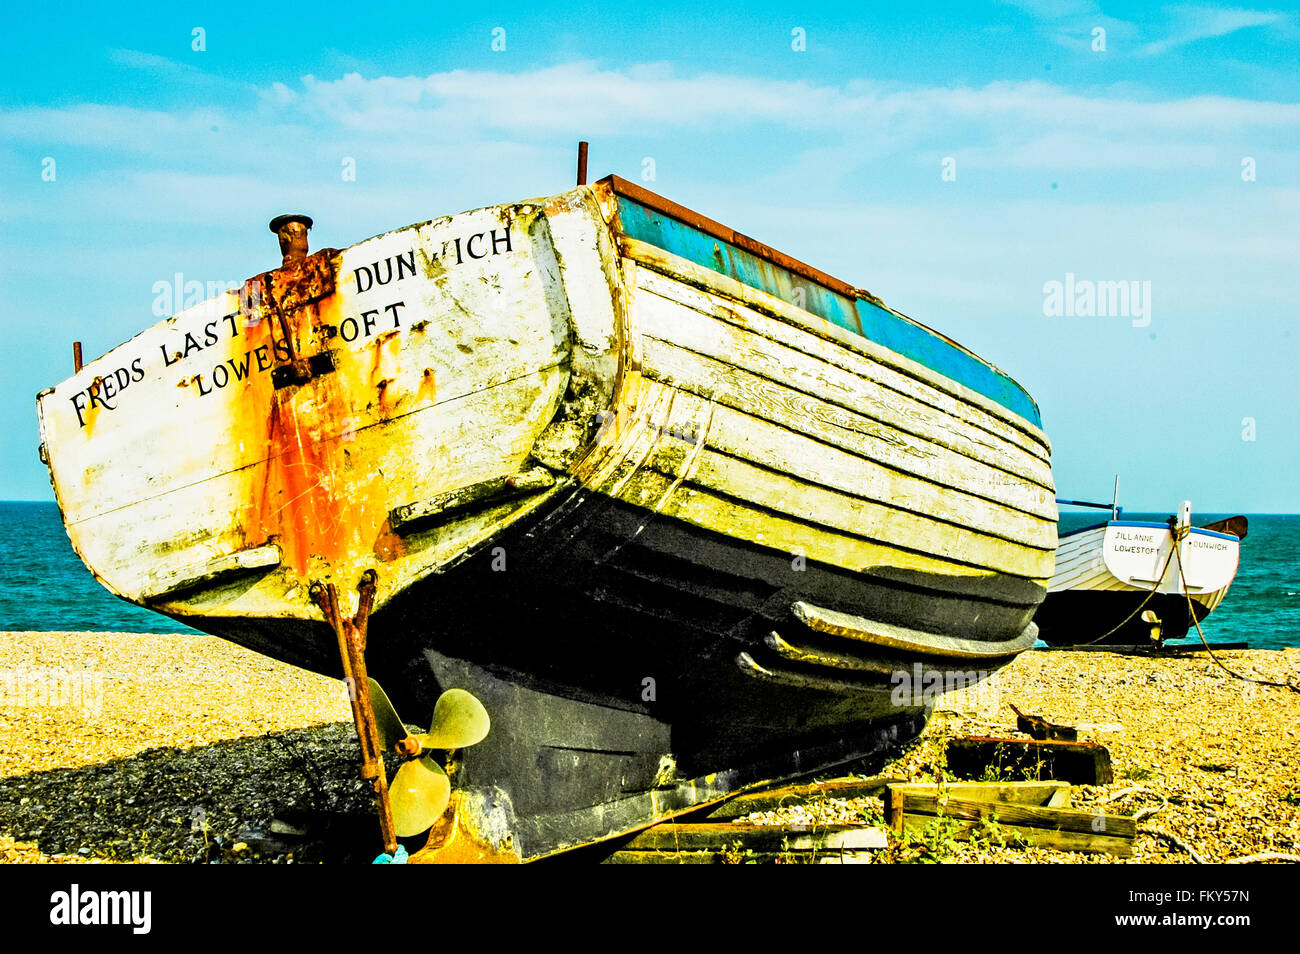 A boat on shore; ein altes Ruderboot am Strand Stock Photo